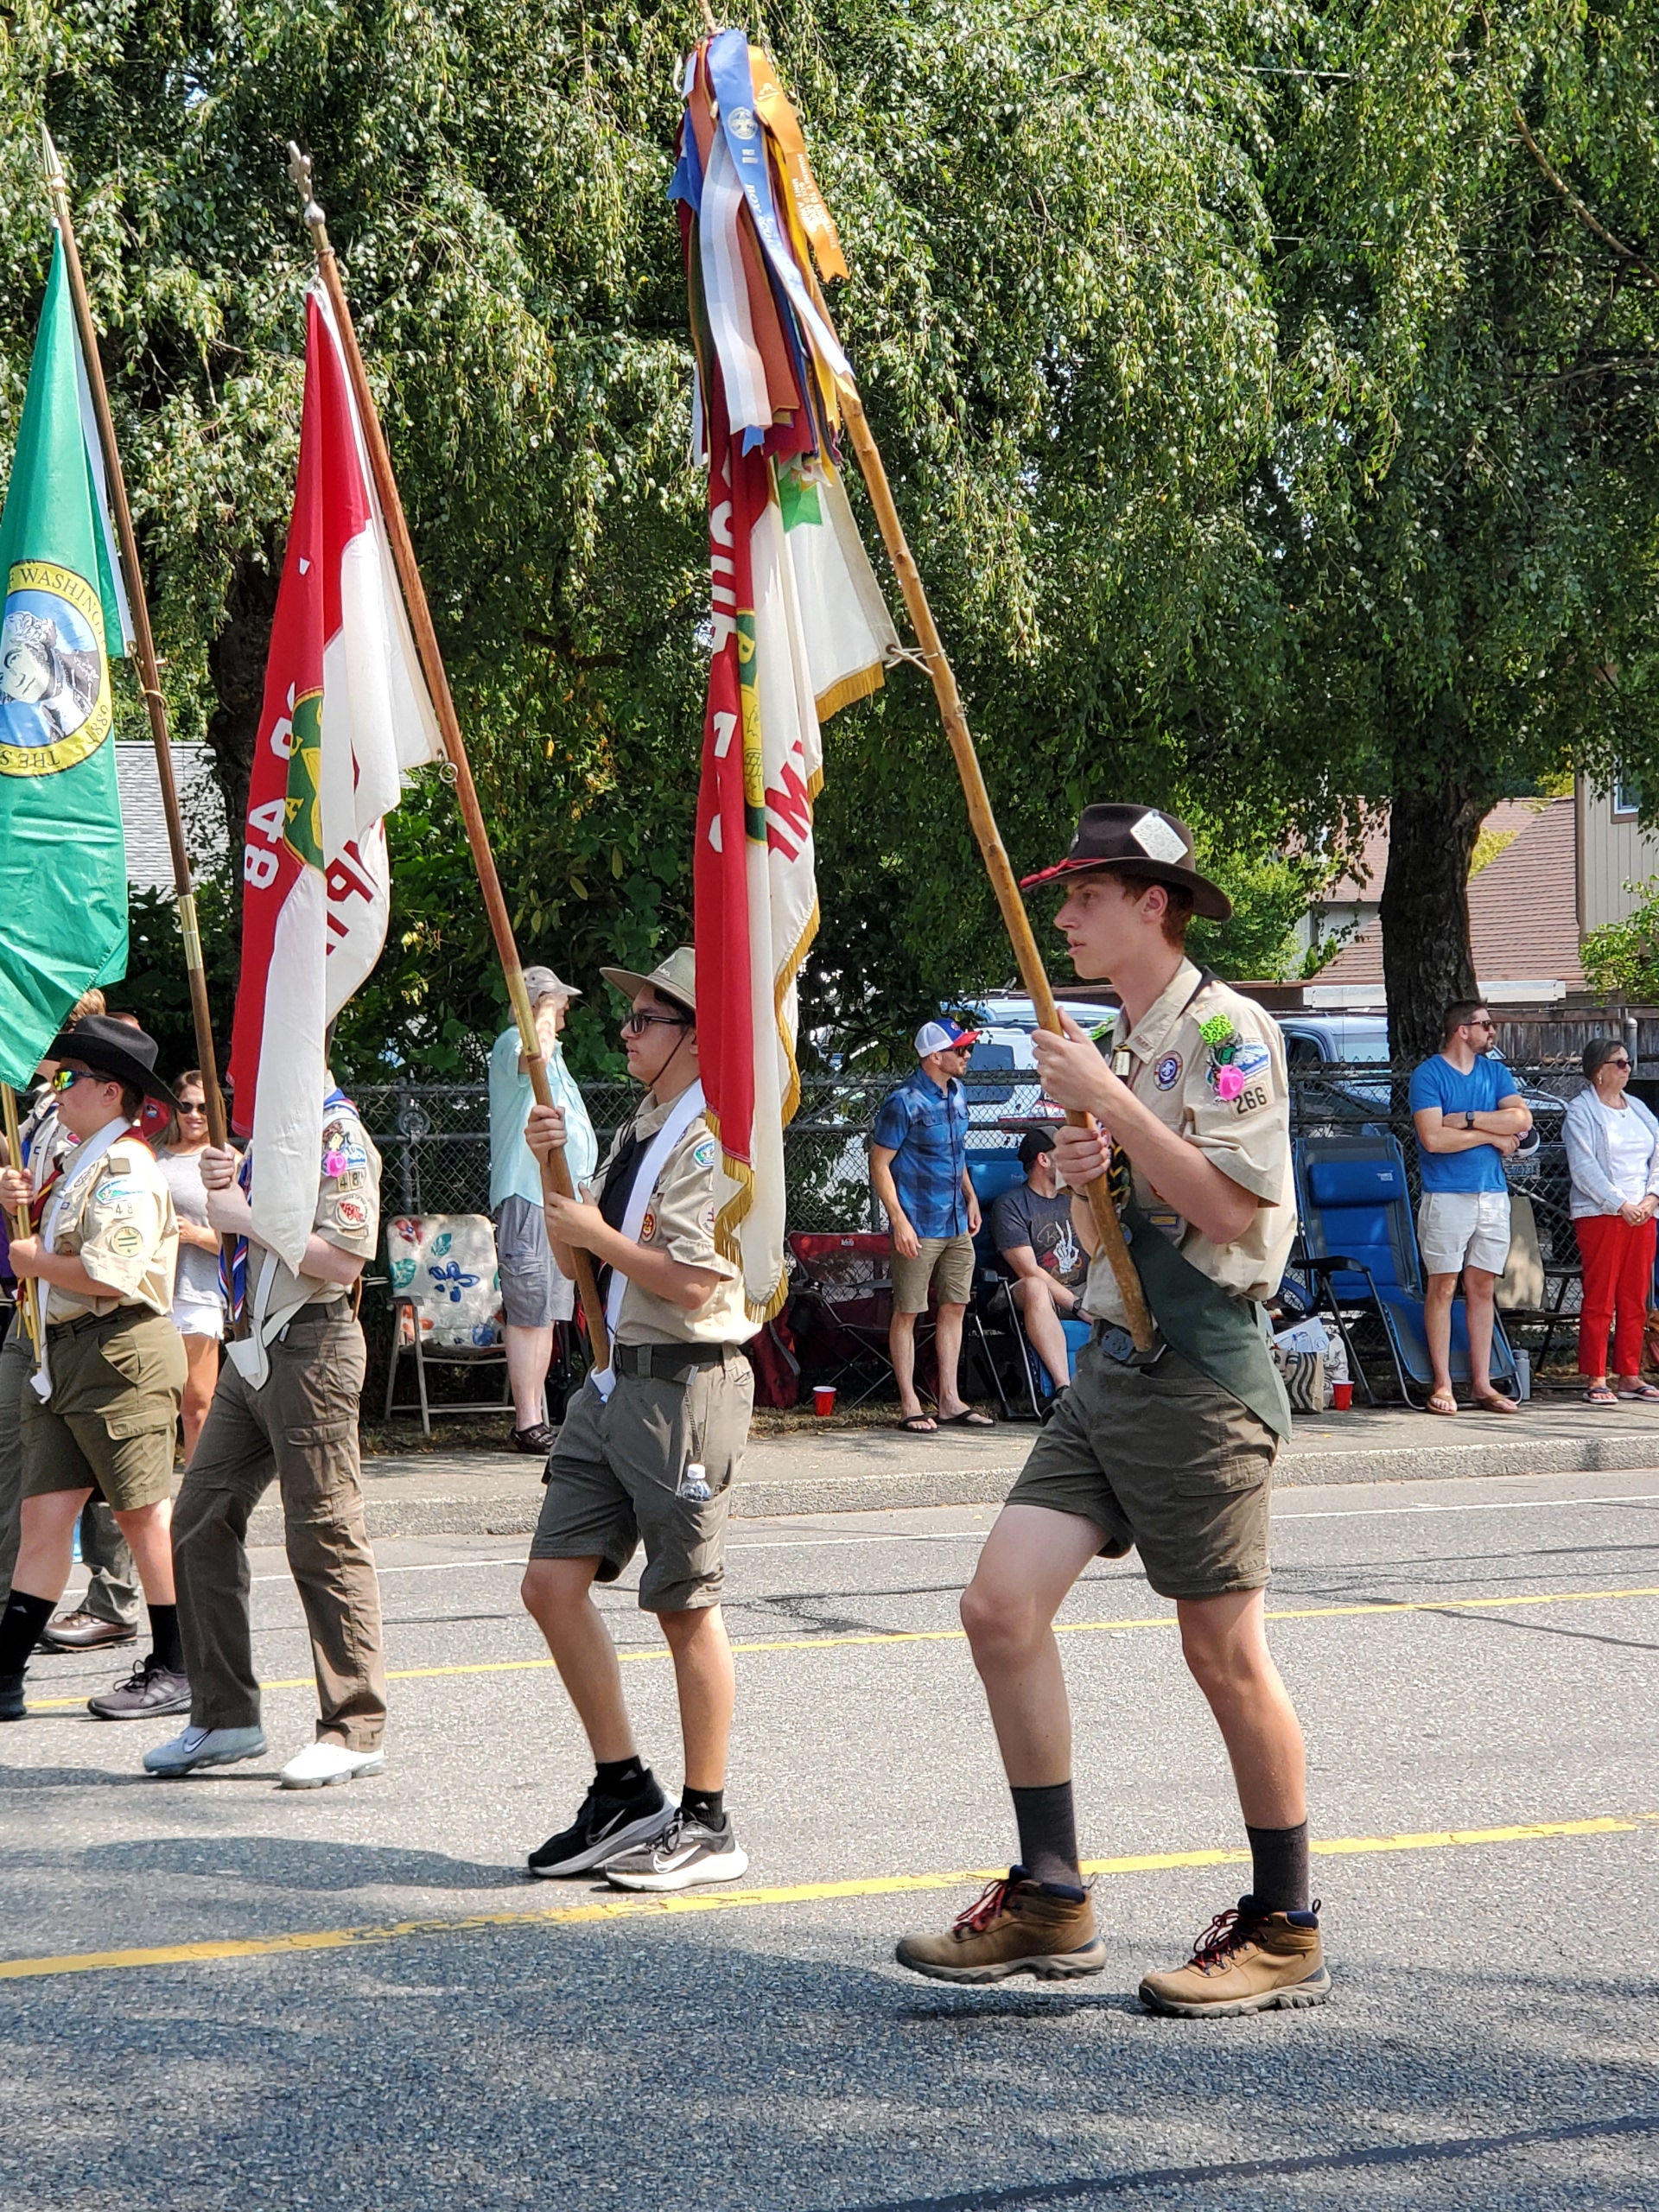 Scout holding the troop flag in the parade.